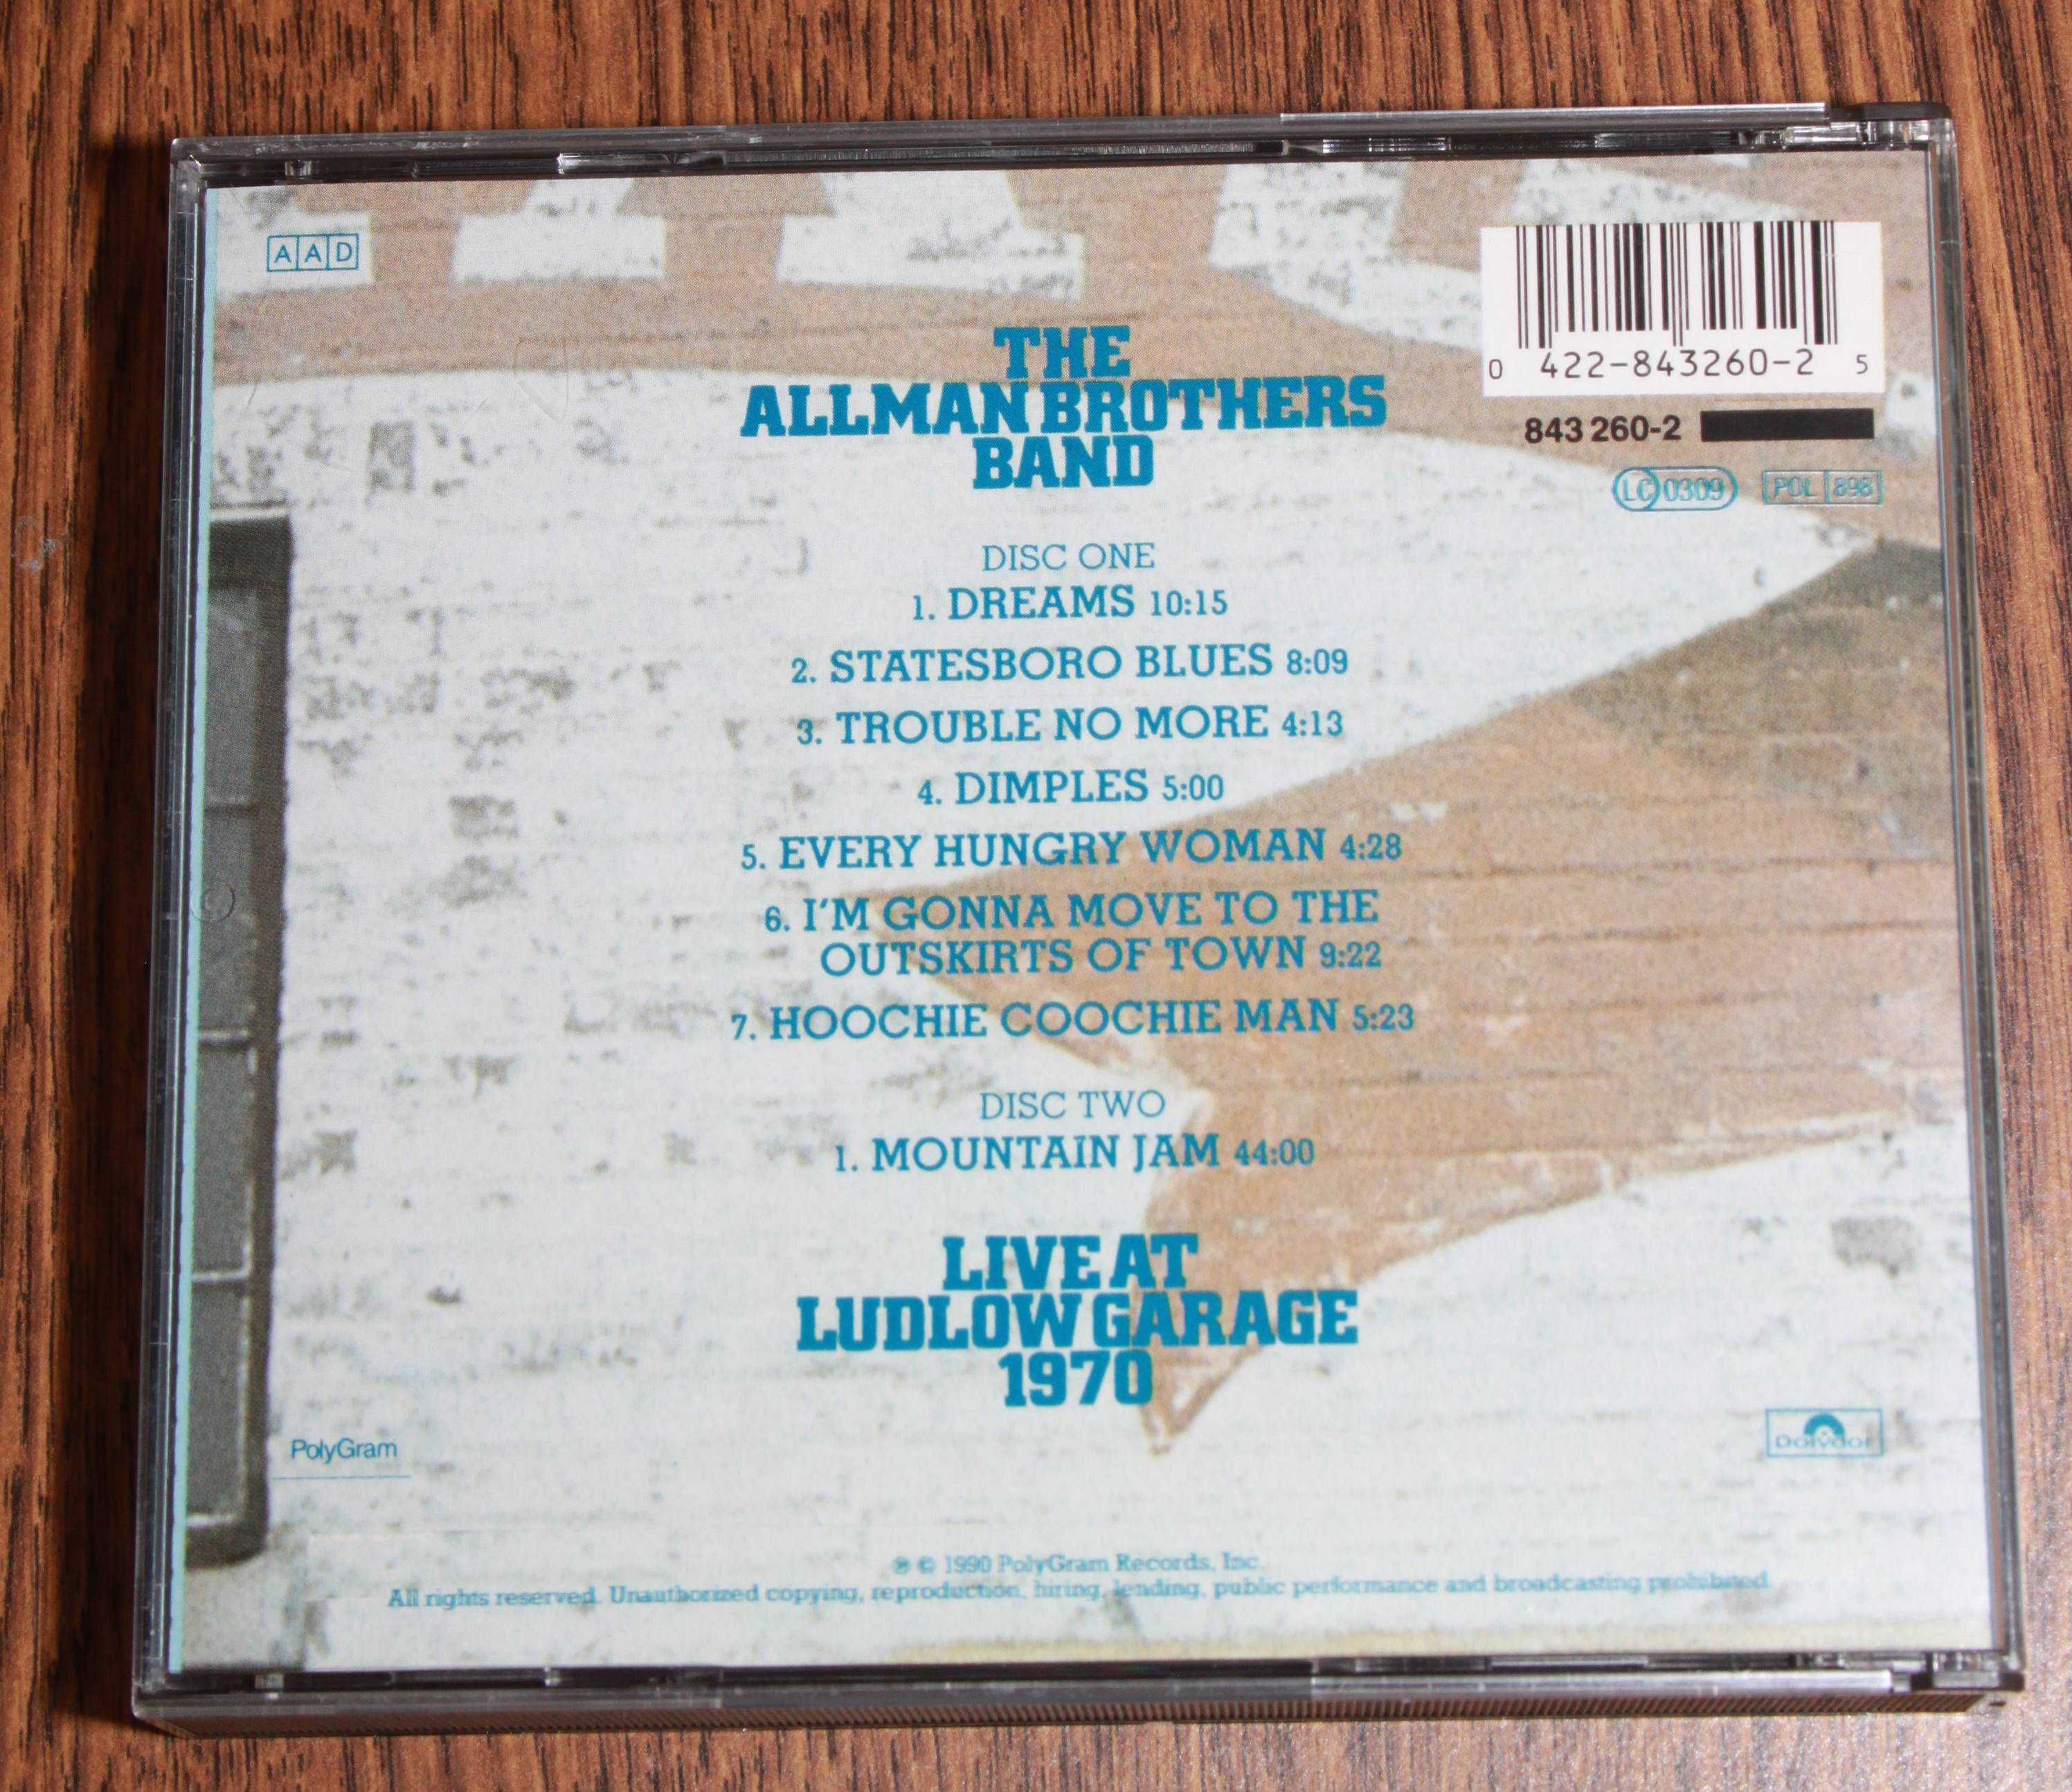 The Allman Brothers Band – Live At Ludlow Garage 1970 (2 CD)